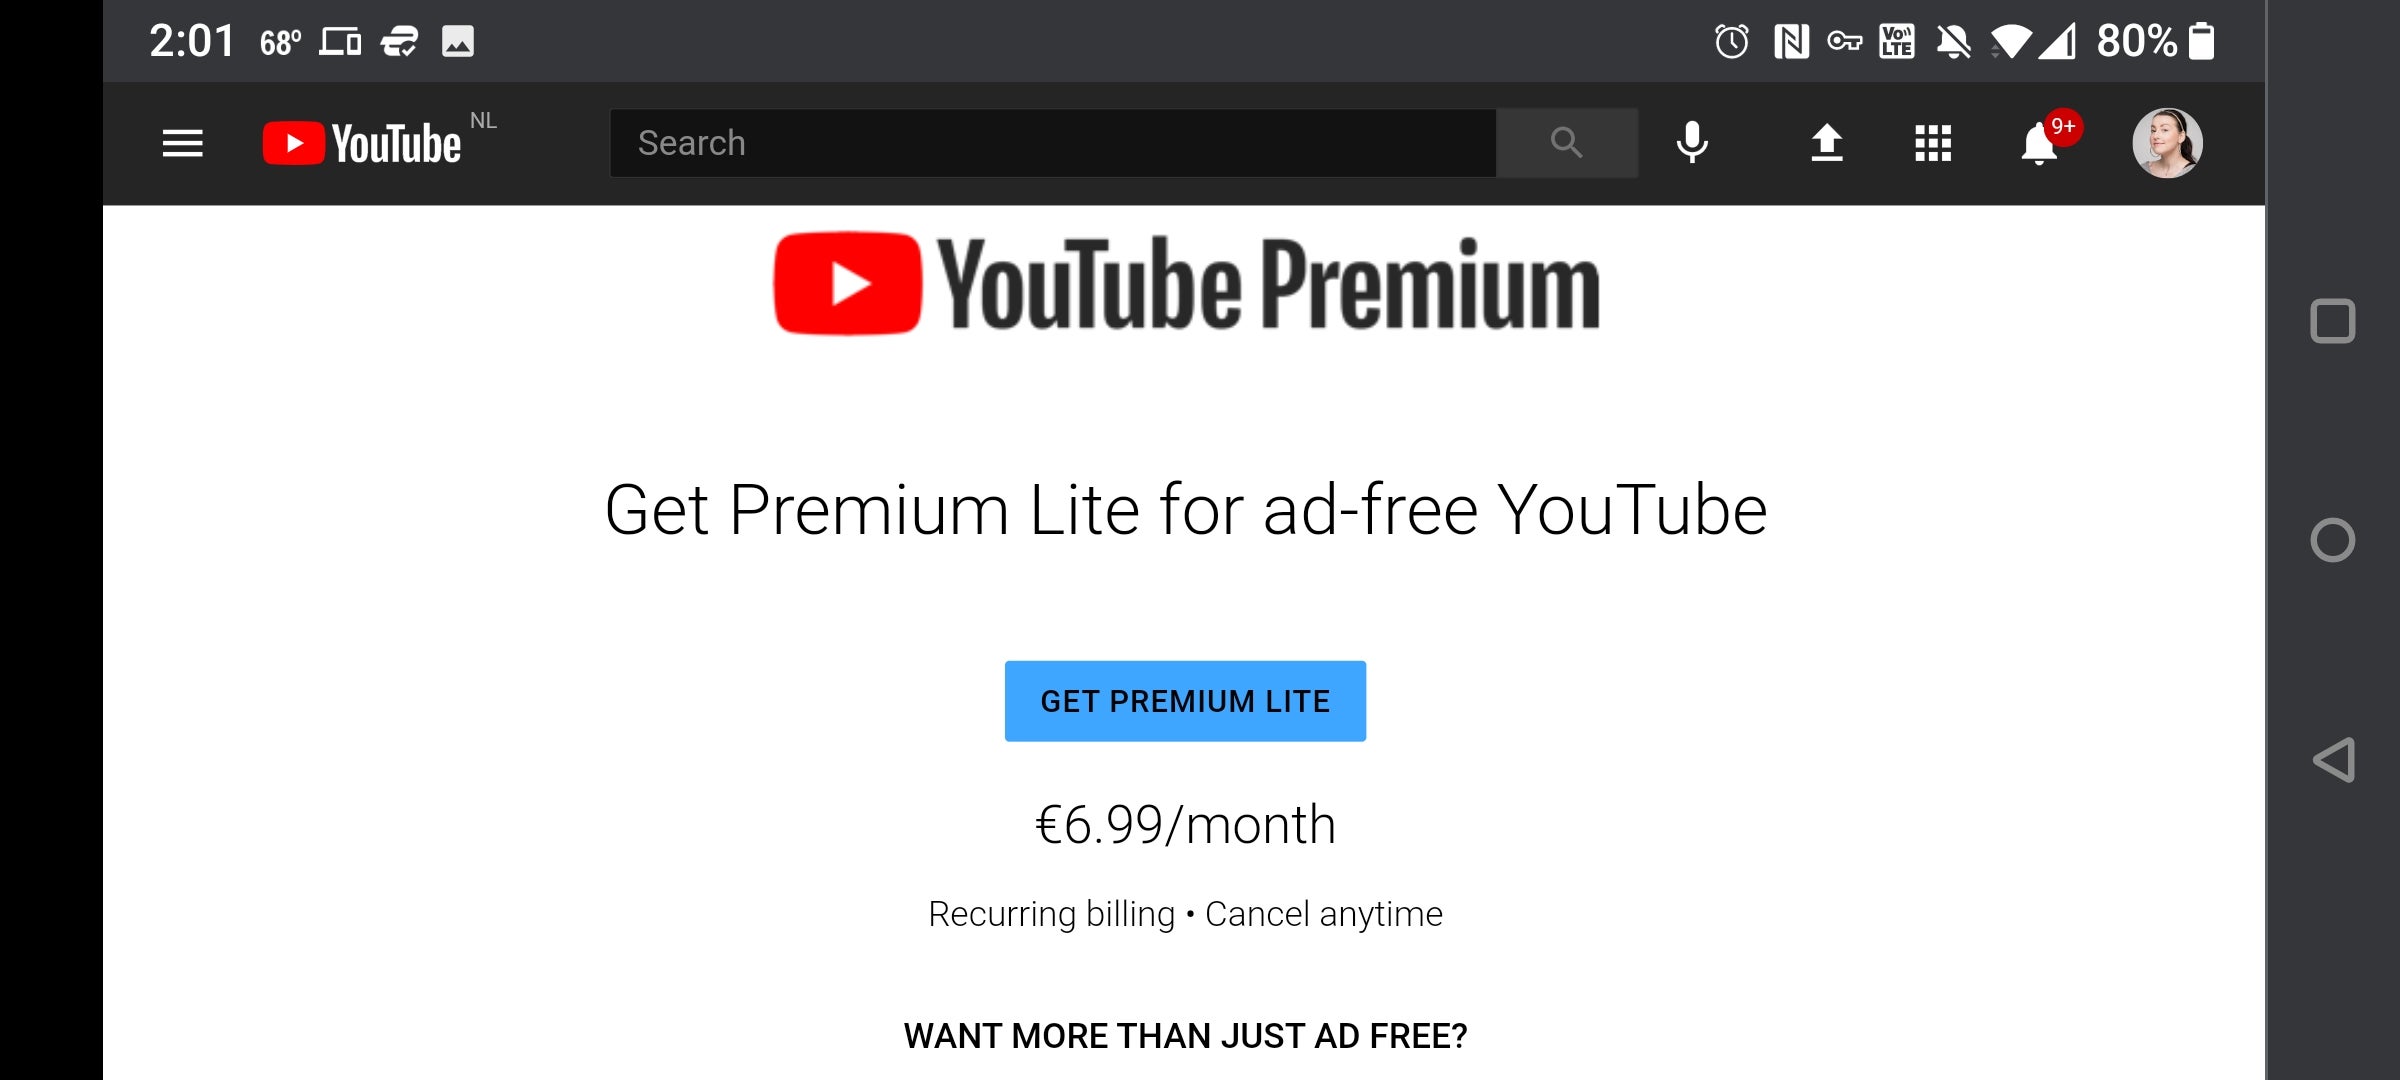 Log in as if you live in the Netherlands, and you'll see the splash page to sign up for YouTube Premium Lite. (Screenshot: Florence Ion / Gizmodo)